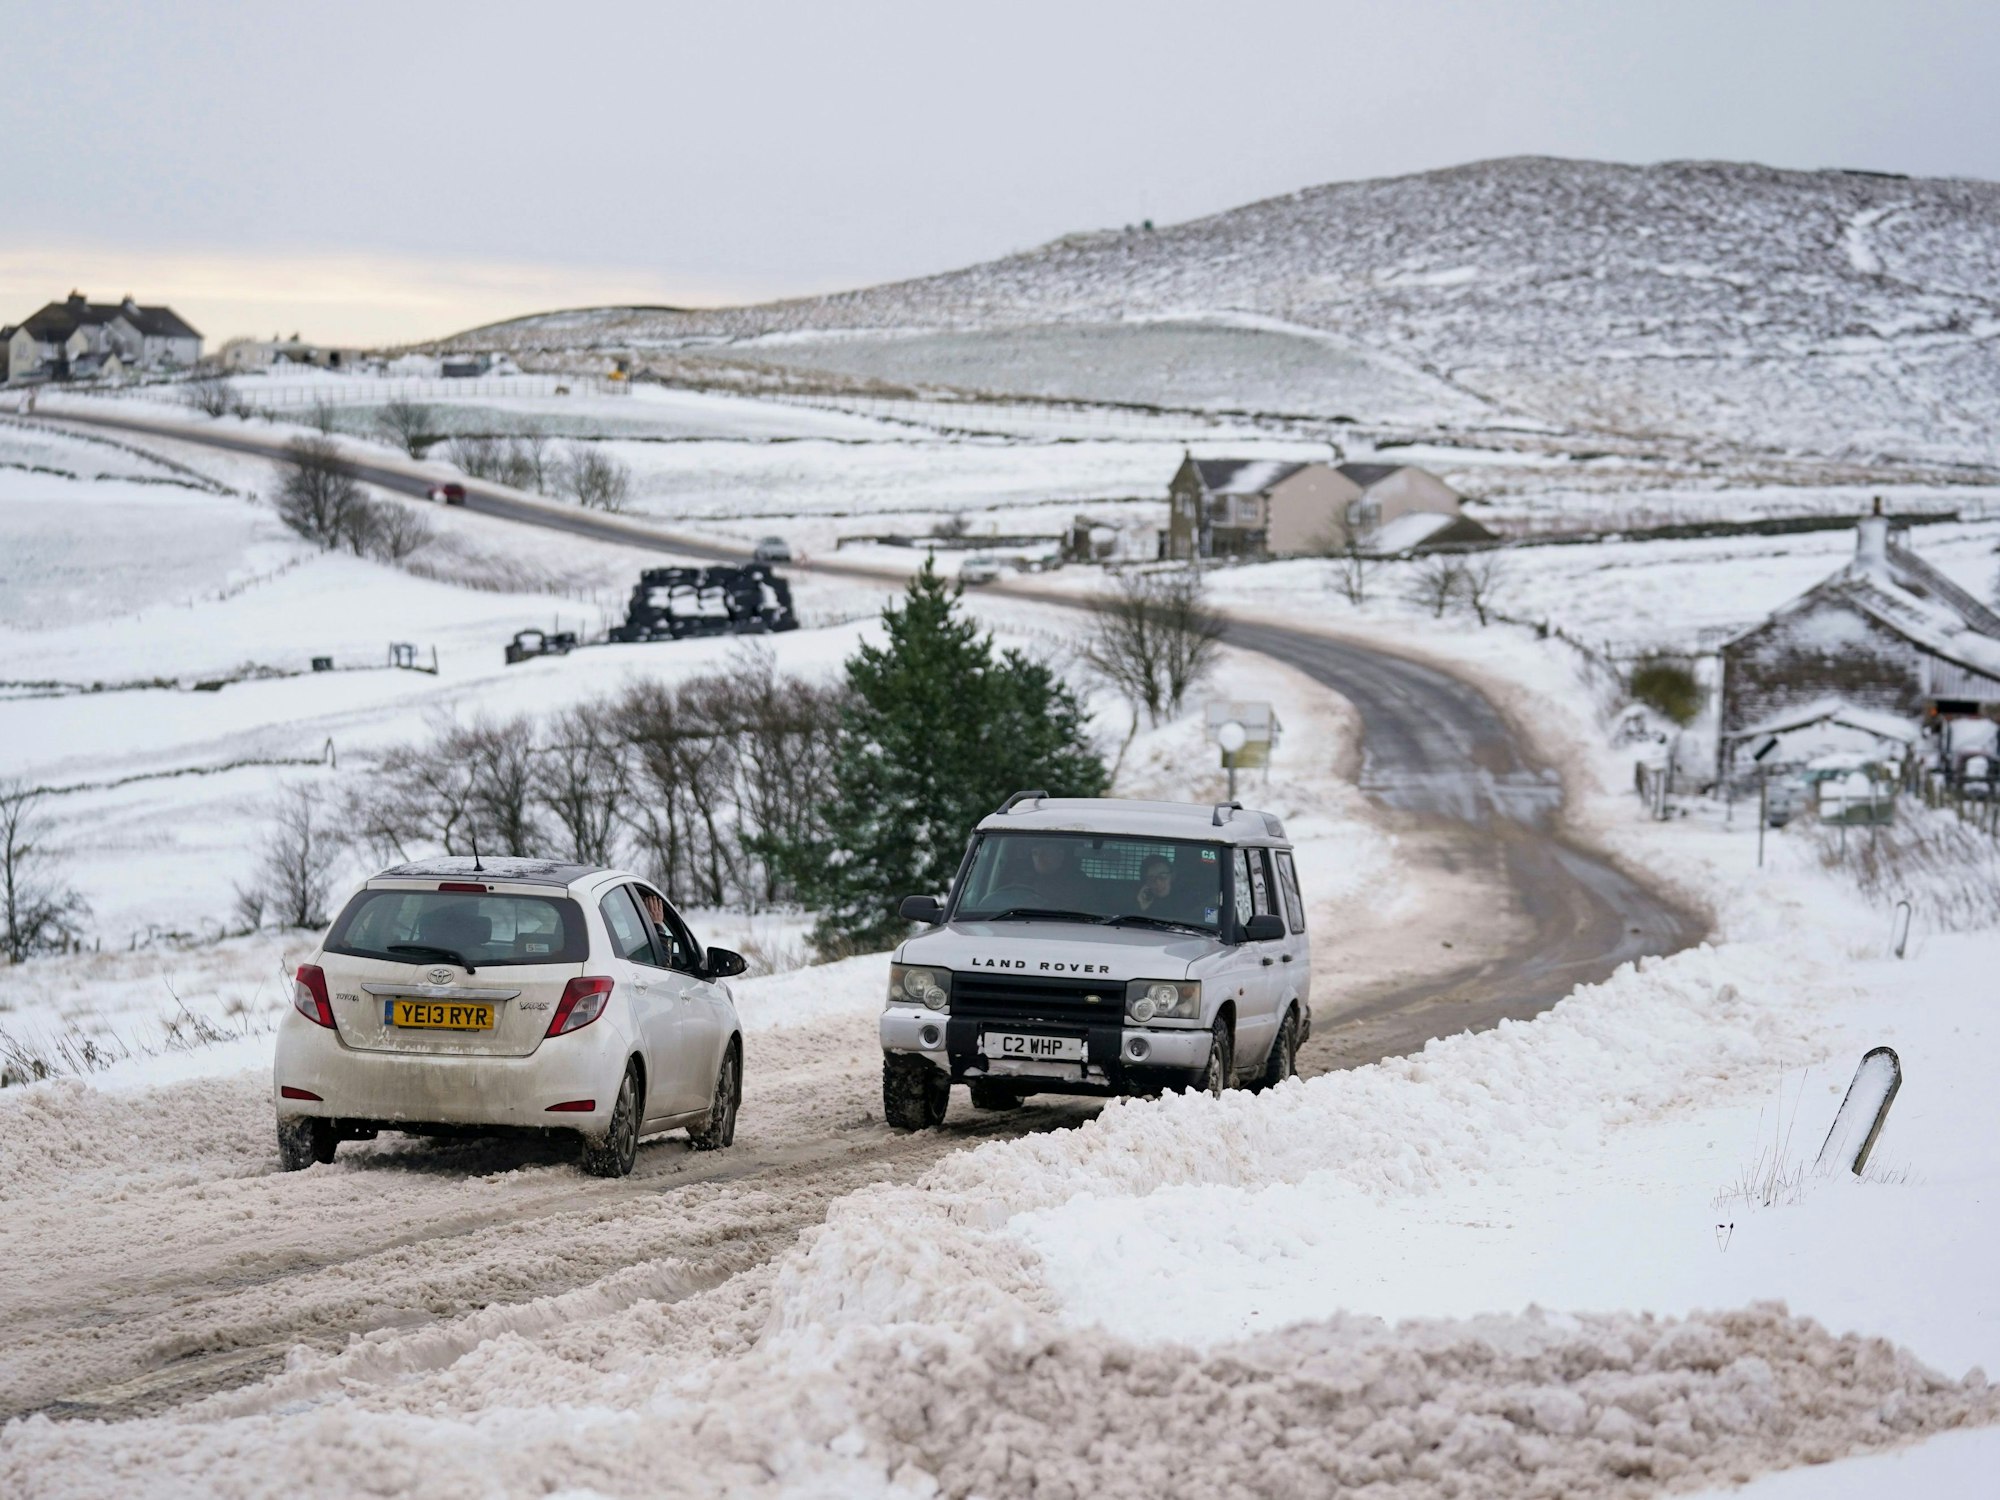 Vehicles travel tentatively on the snow-covered A53 close to Buxton in Derbyshire, amid freezing conditions in the aftermath of Storm Arwen, England, Sunday, Nov. 28, 2021.  (Jacob King/PA via AP)